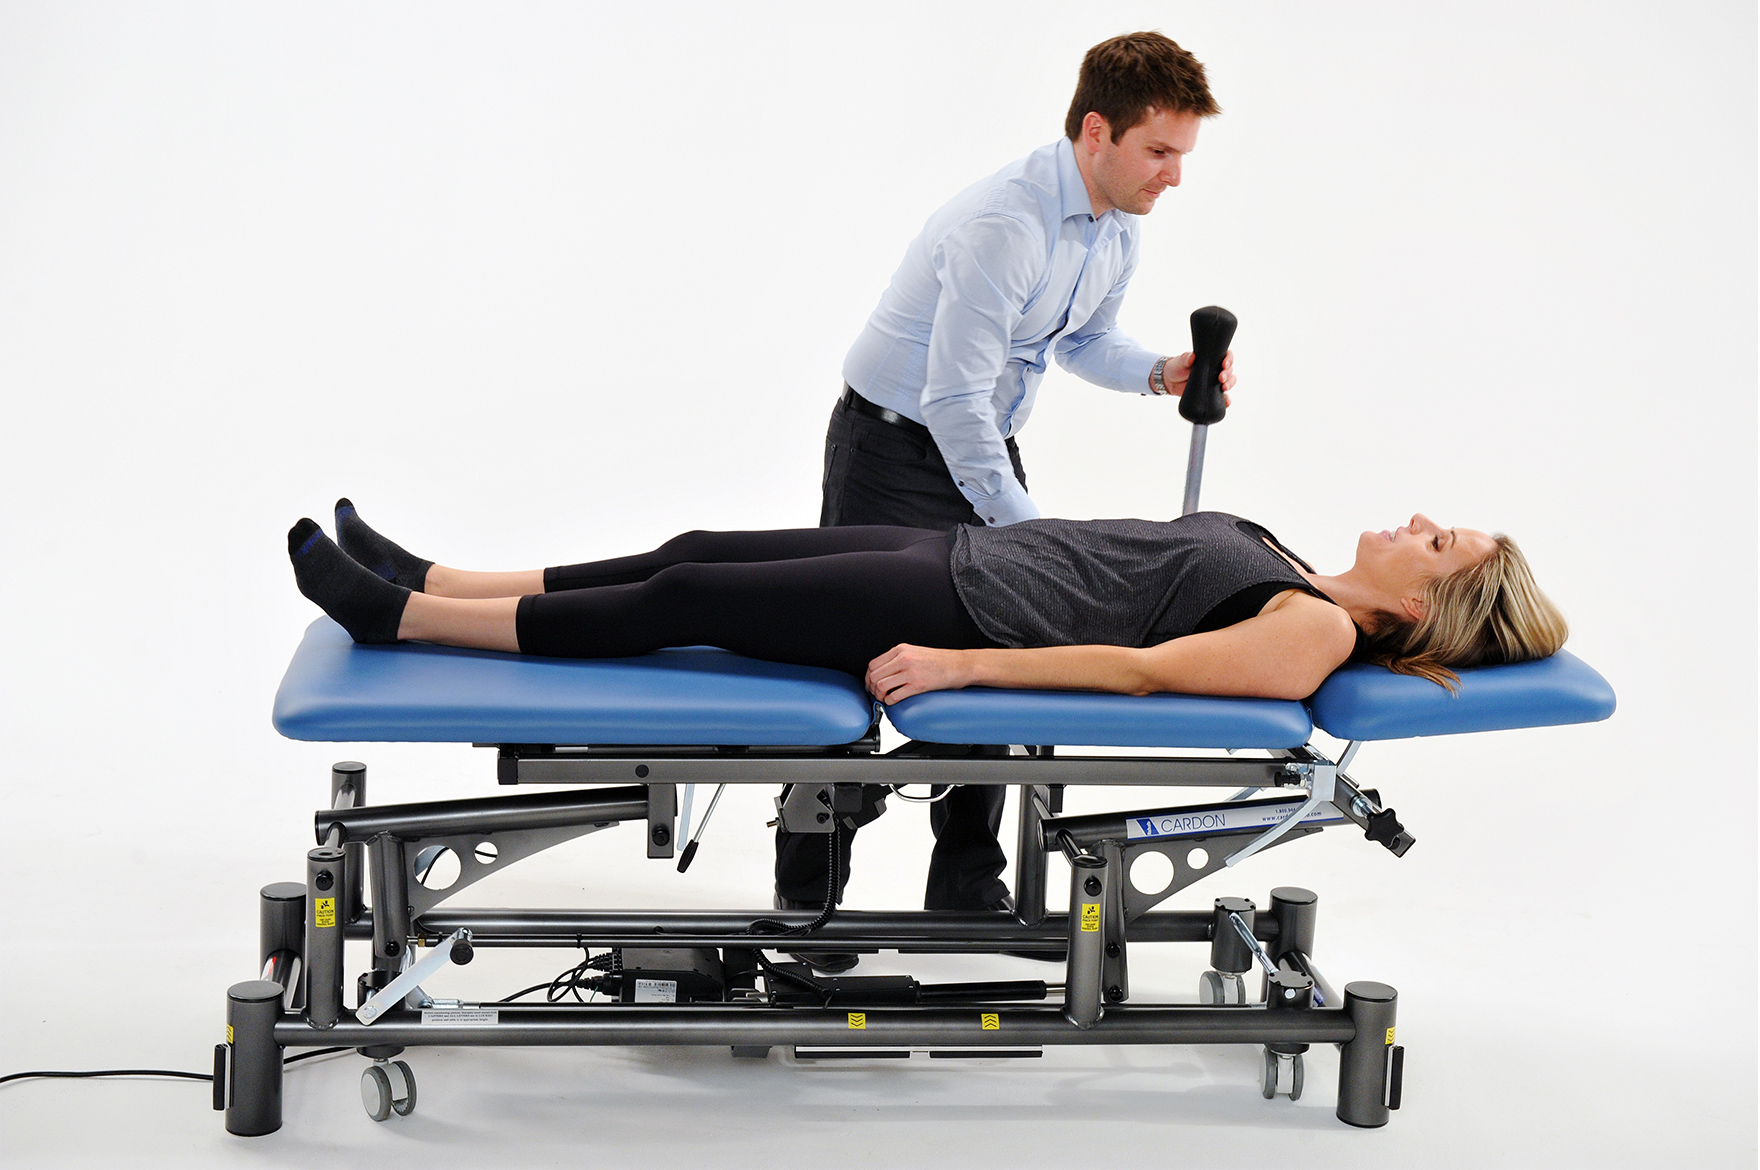 North America's Best Physical Therapy Treatment Table Cardon